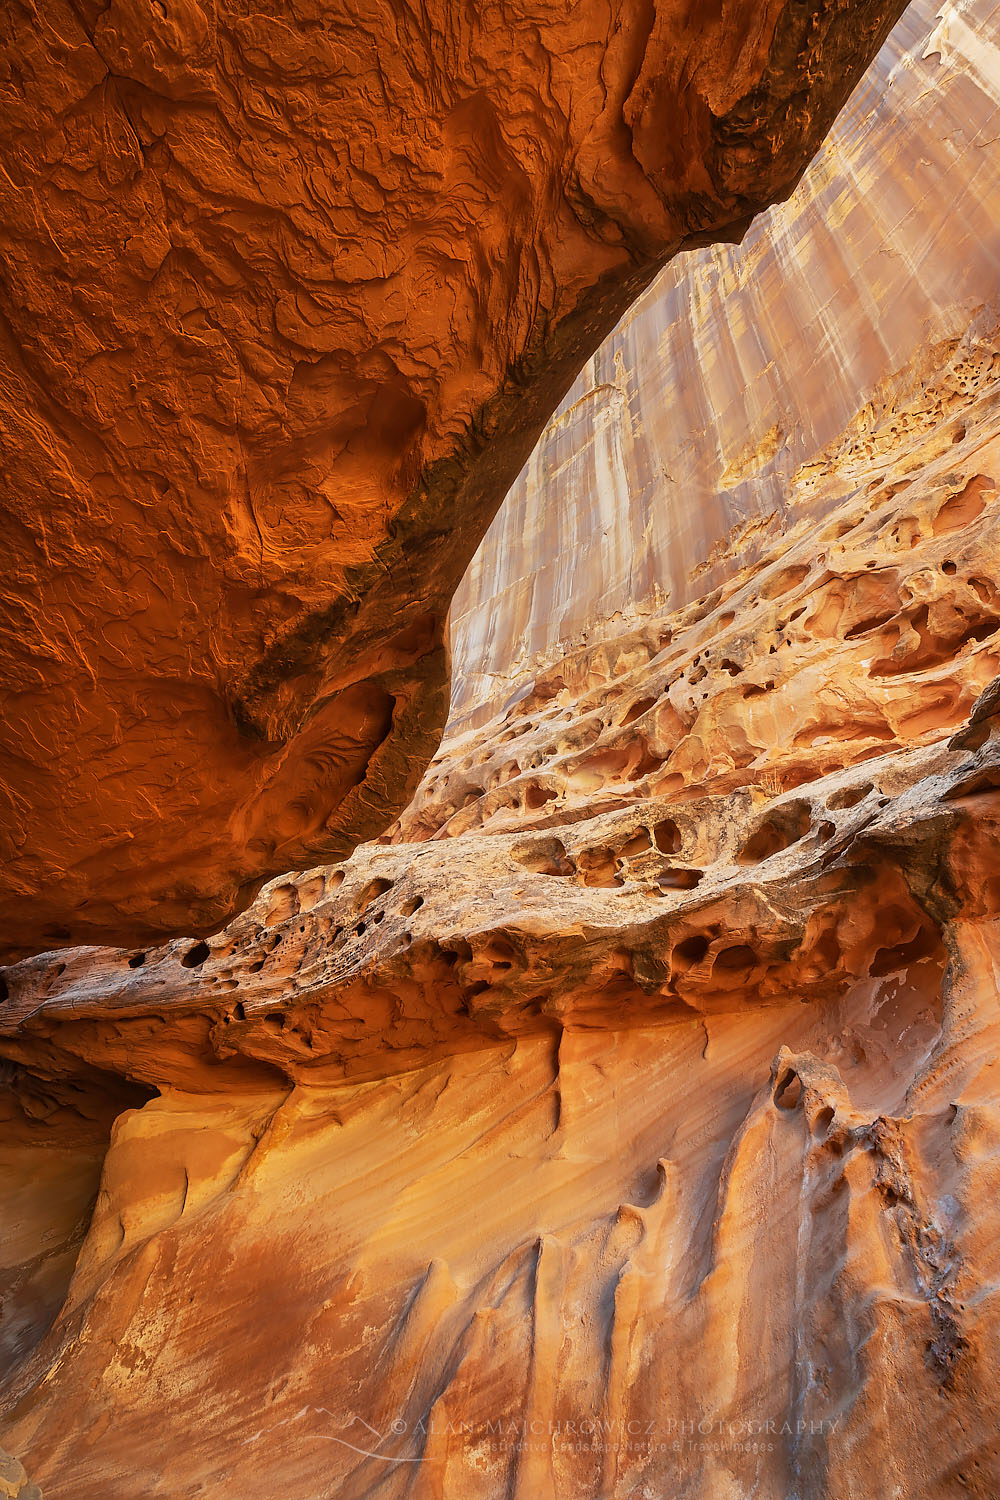 Eroded sandstone walls and overhangs resembling Swiss Cheese in the"subway" slot portion of Crack Canyon San Rafael Reef Utah #75128